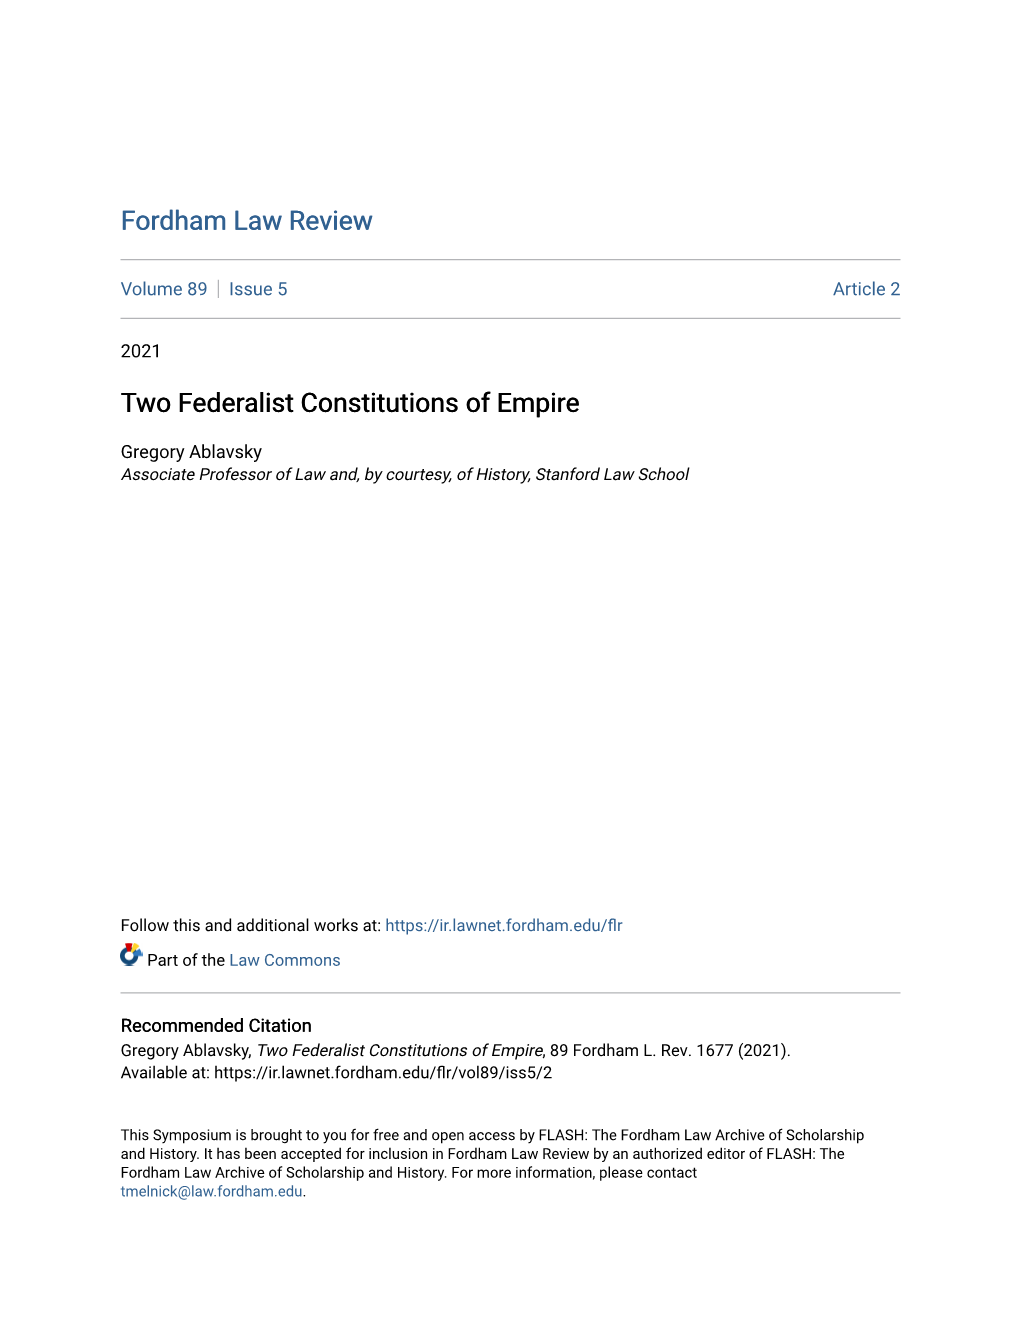 Two Federalist Constitutions of Empire